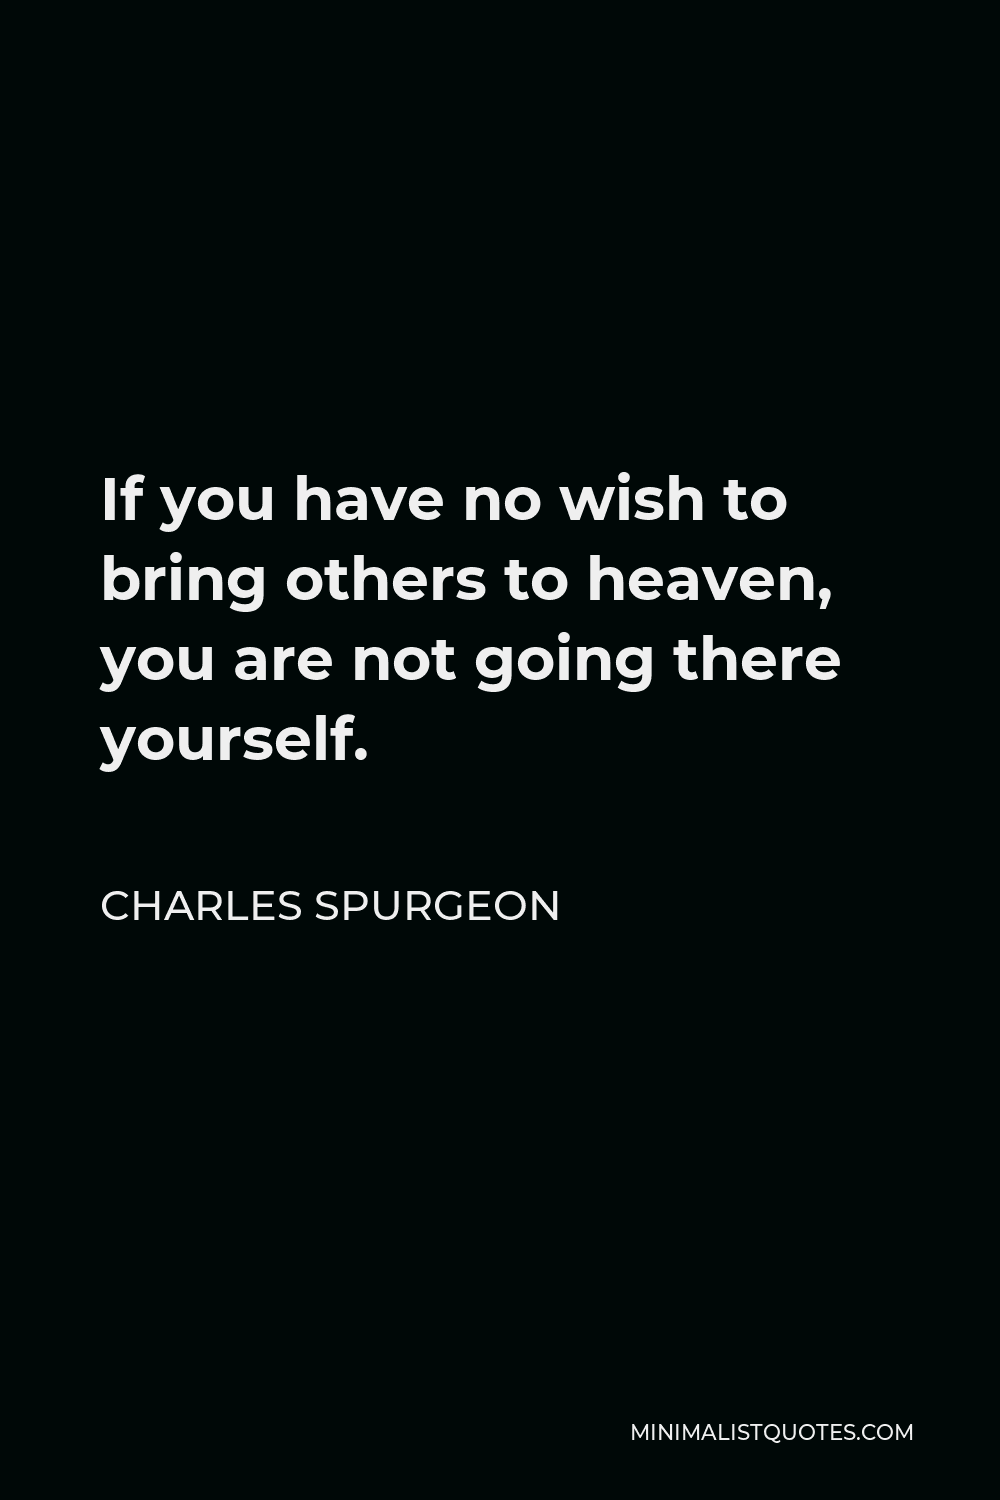 Charles Spurgeon Quote - If you have no wish to bring others to heaven, you are not going there yourself.